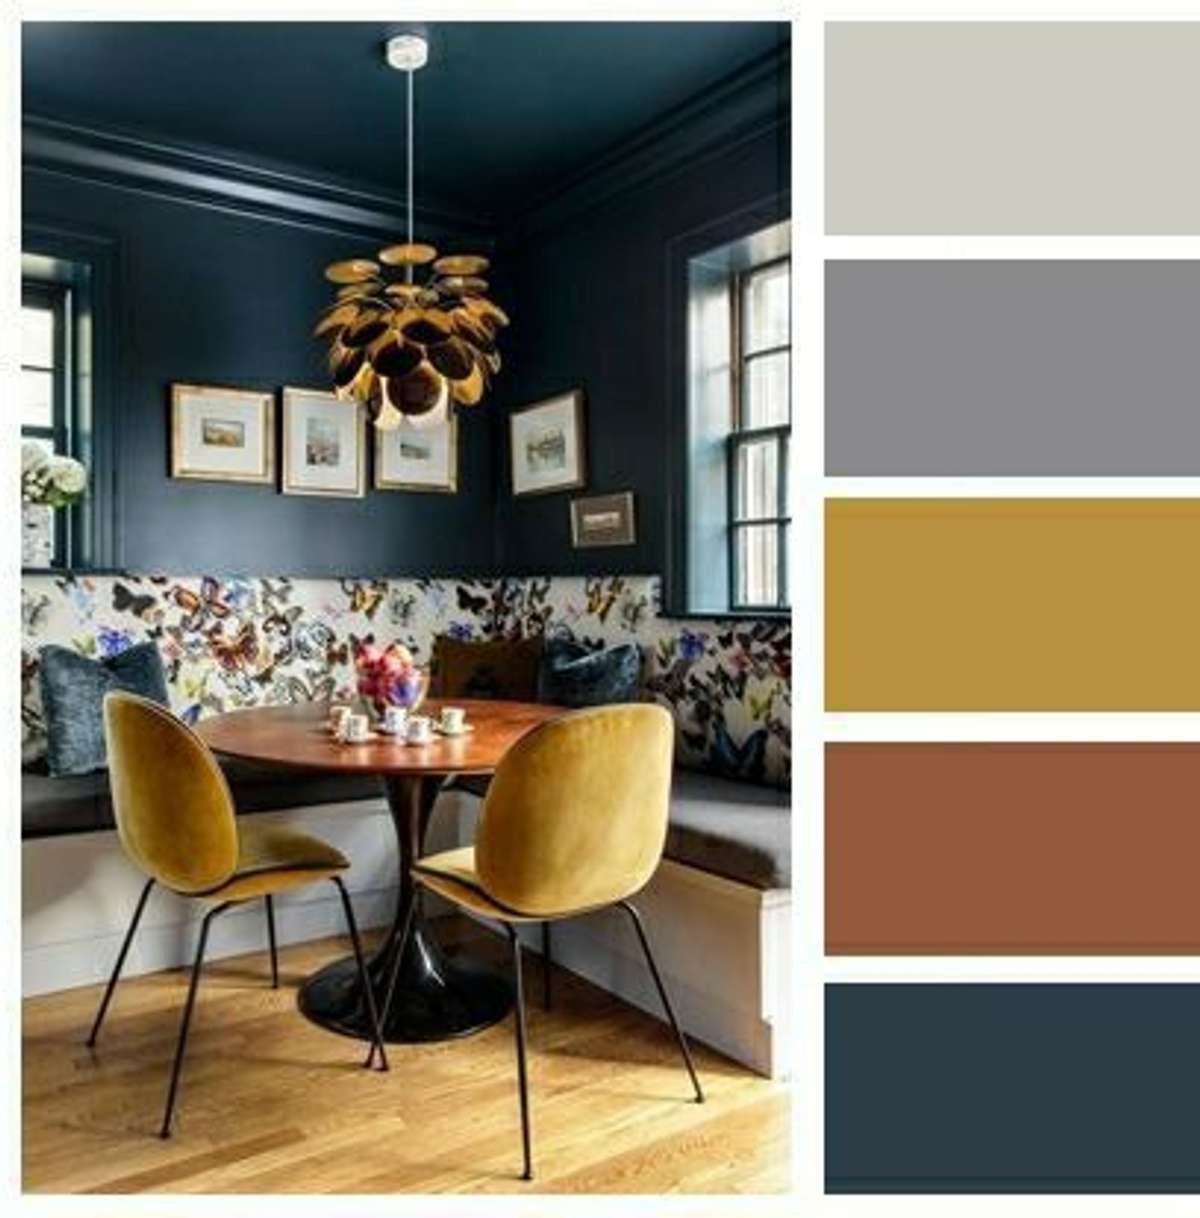 What colour for room - series

Dining room
- shades of red
- mustard yellow
- dark blue
-orange
-green

what would you give?
